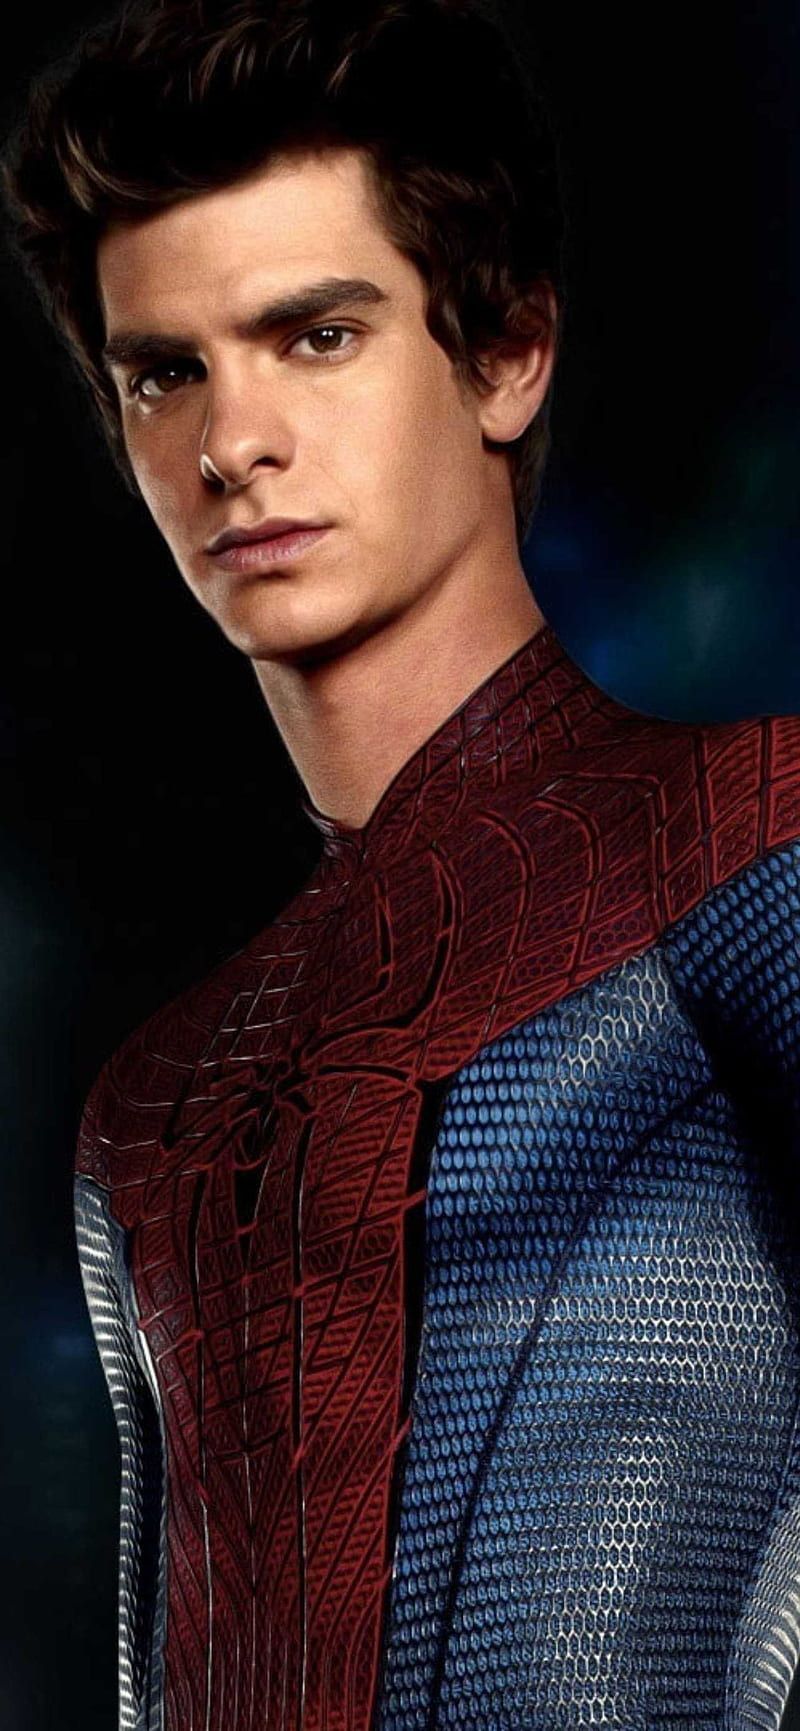 Andrew Garfield as Spiderman in the amazing Spiderman - Andrew Garfield